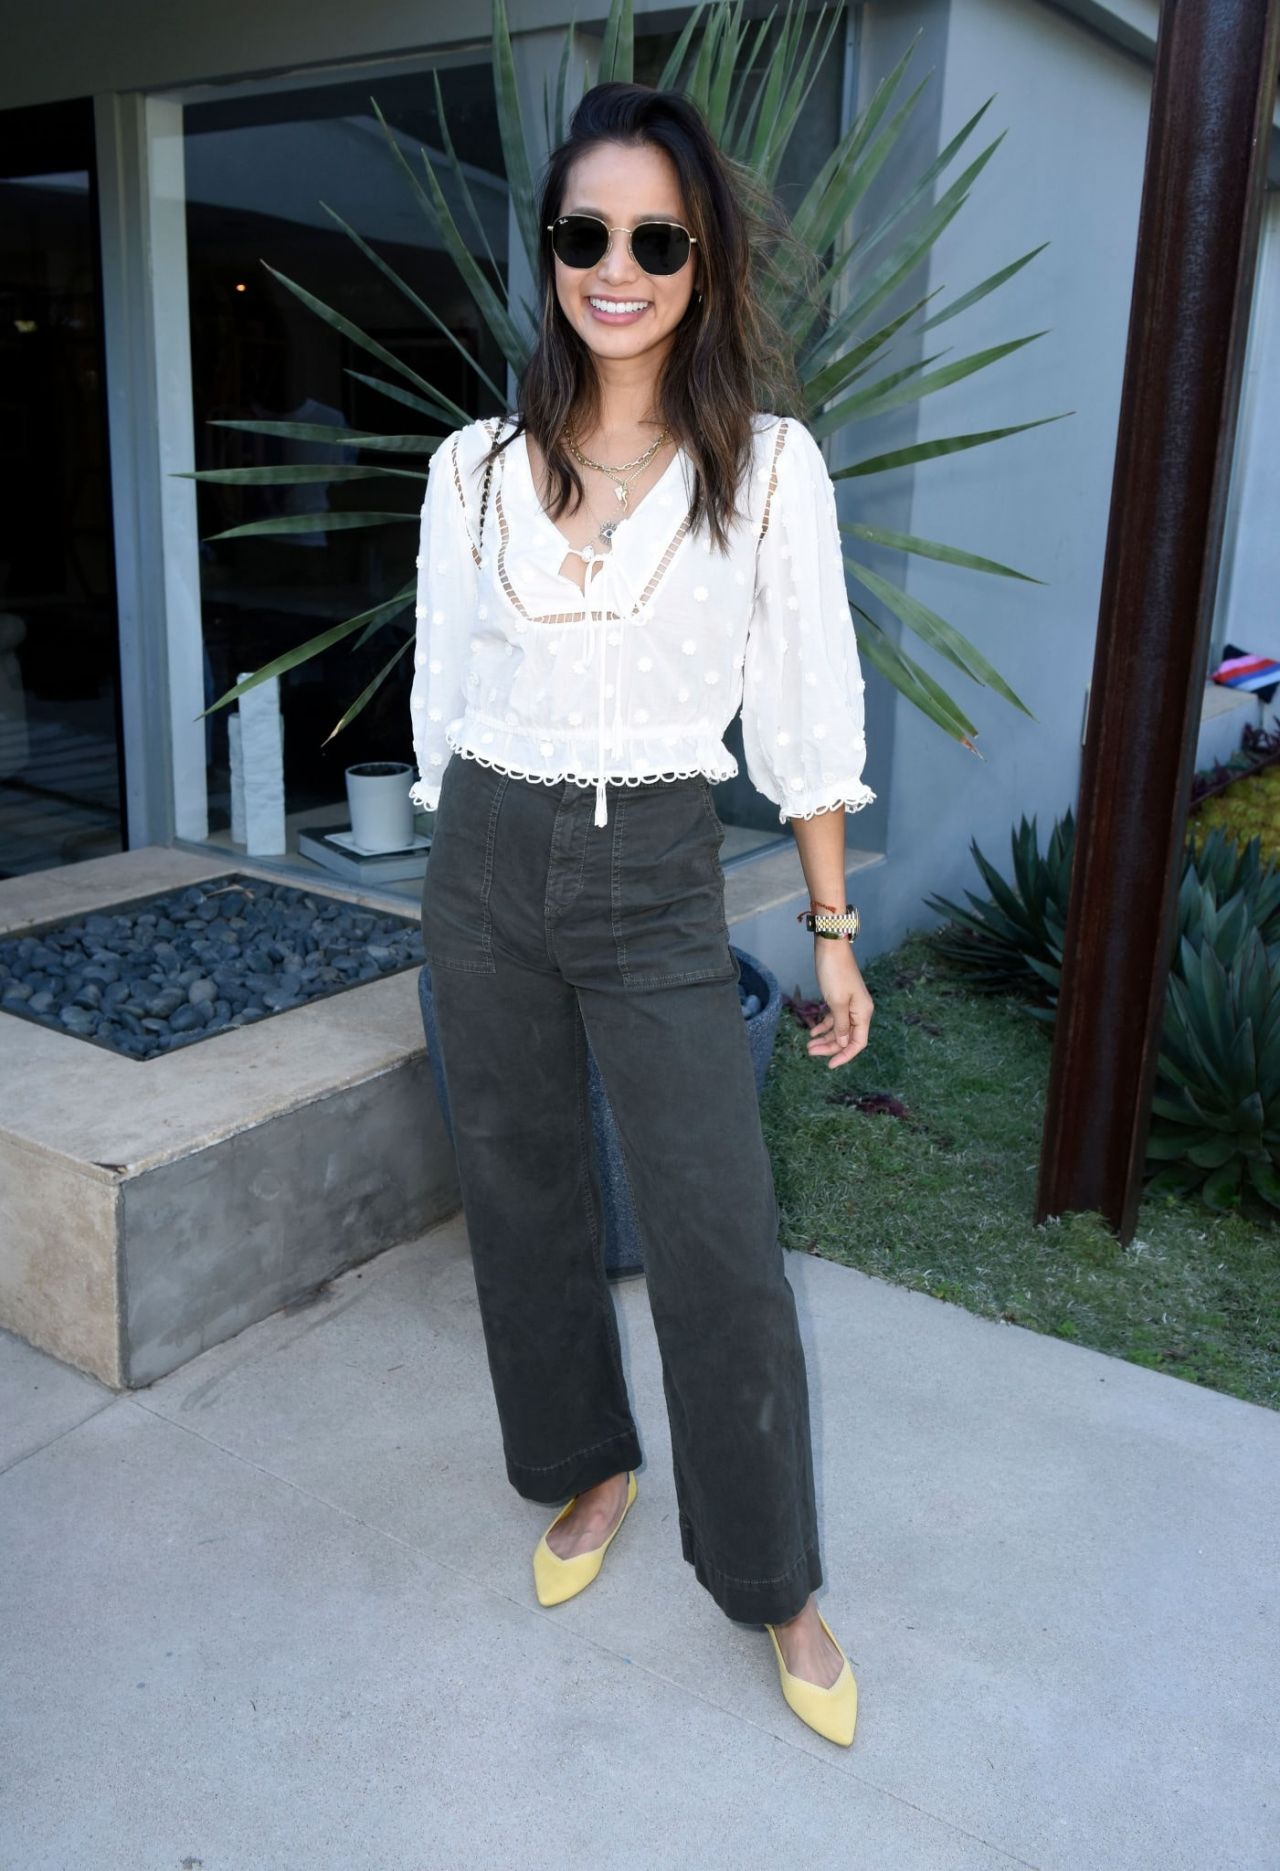 jamie-chung-rothy-s-conscious-cocktails-event-in-la-08-20-2019-2.jpg